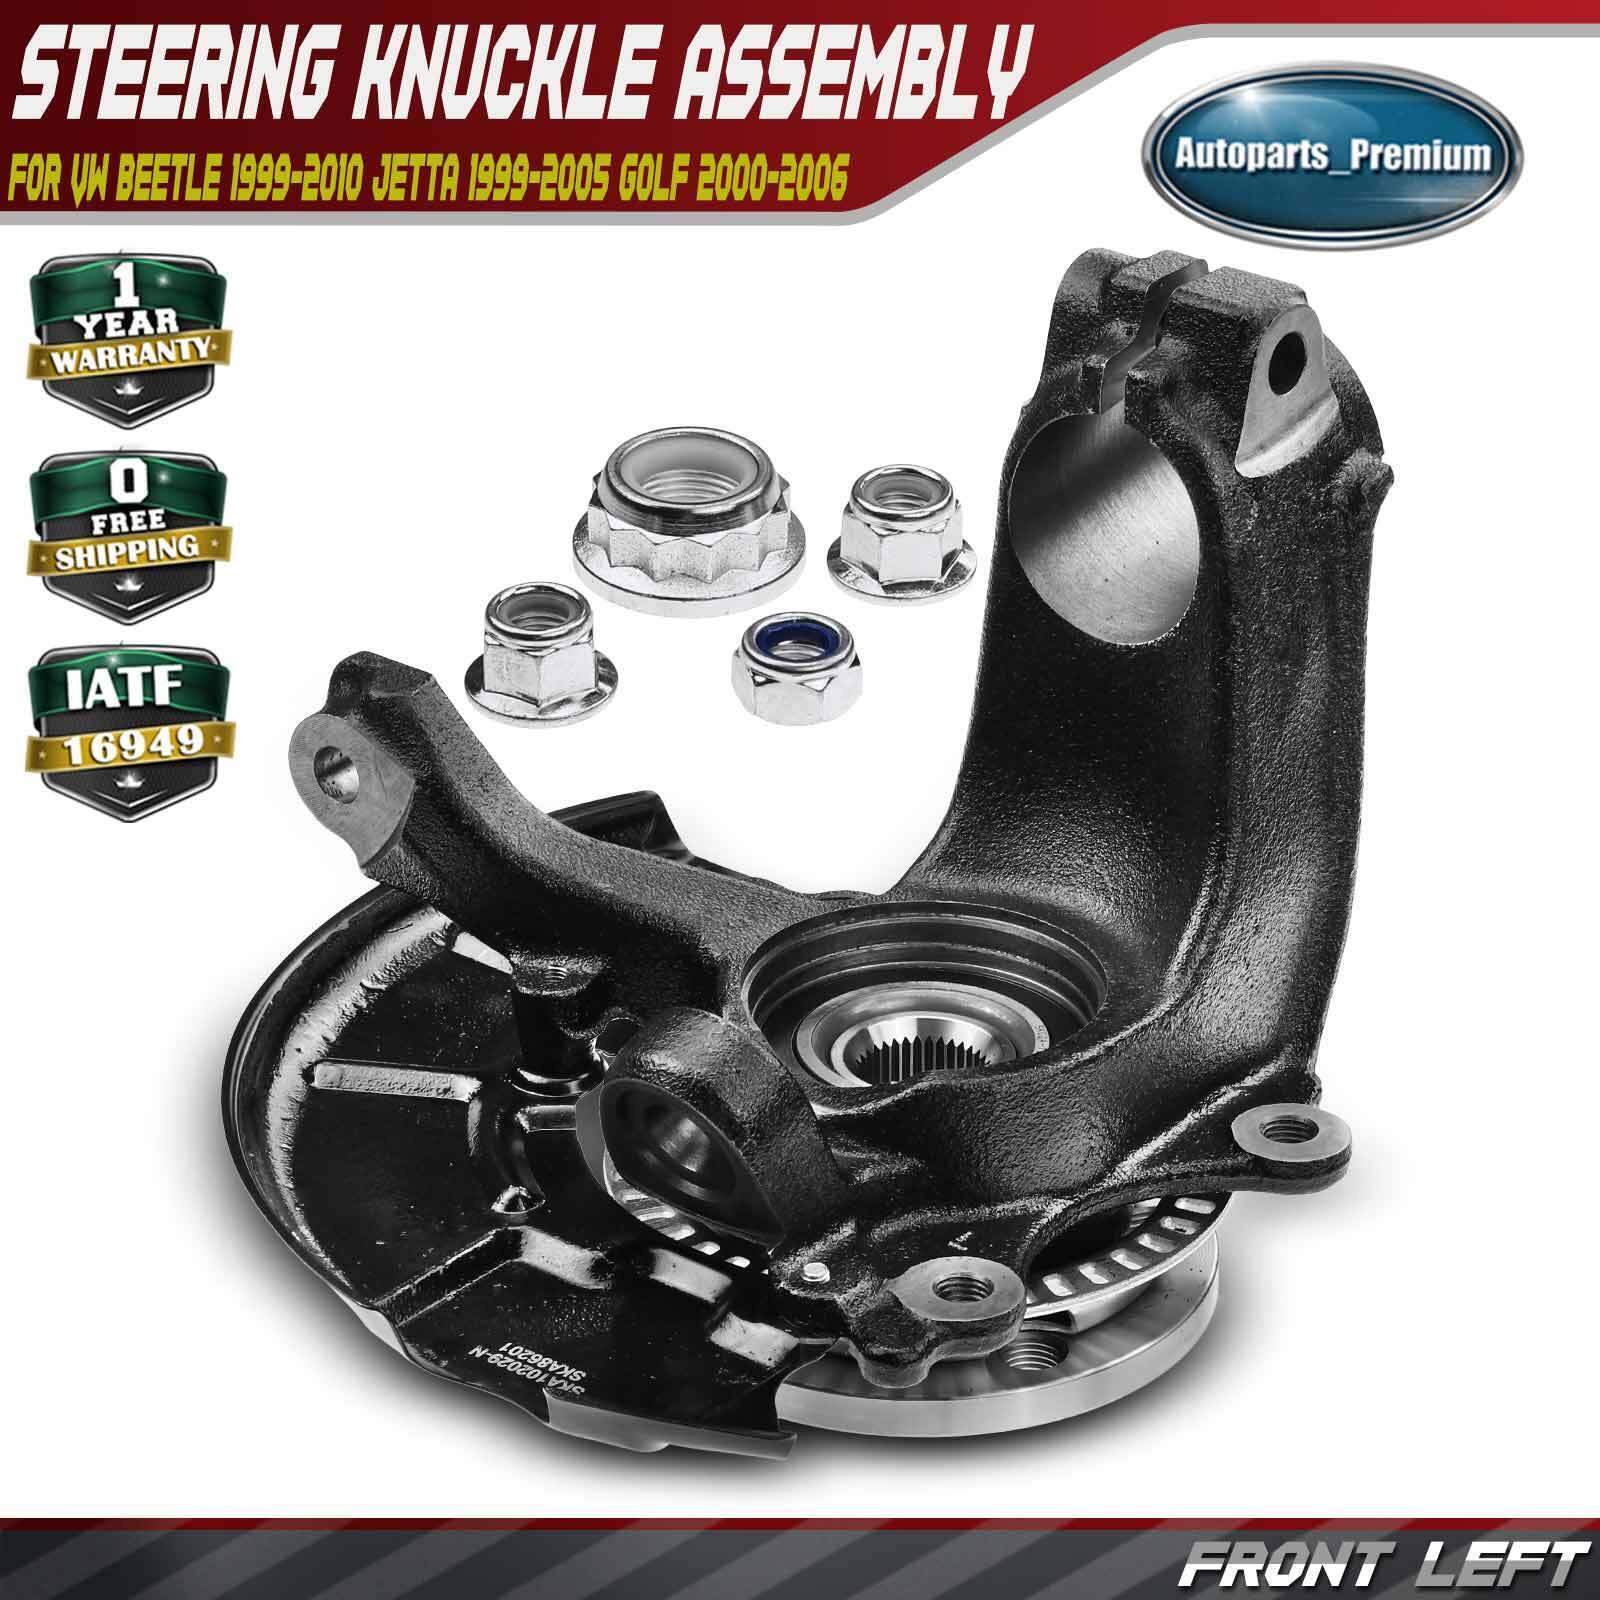 Front LH Steering Knuckle & Wheel Hub Bearing Assembly for VW Beetle Golf Jetta